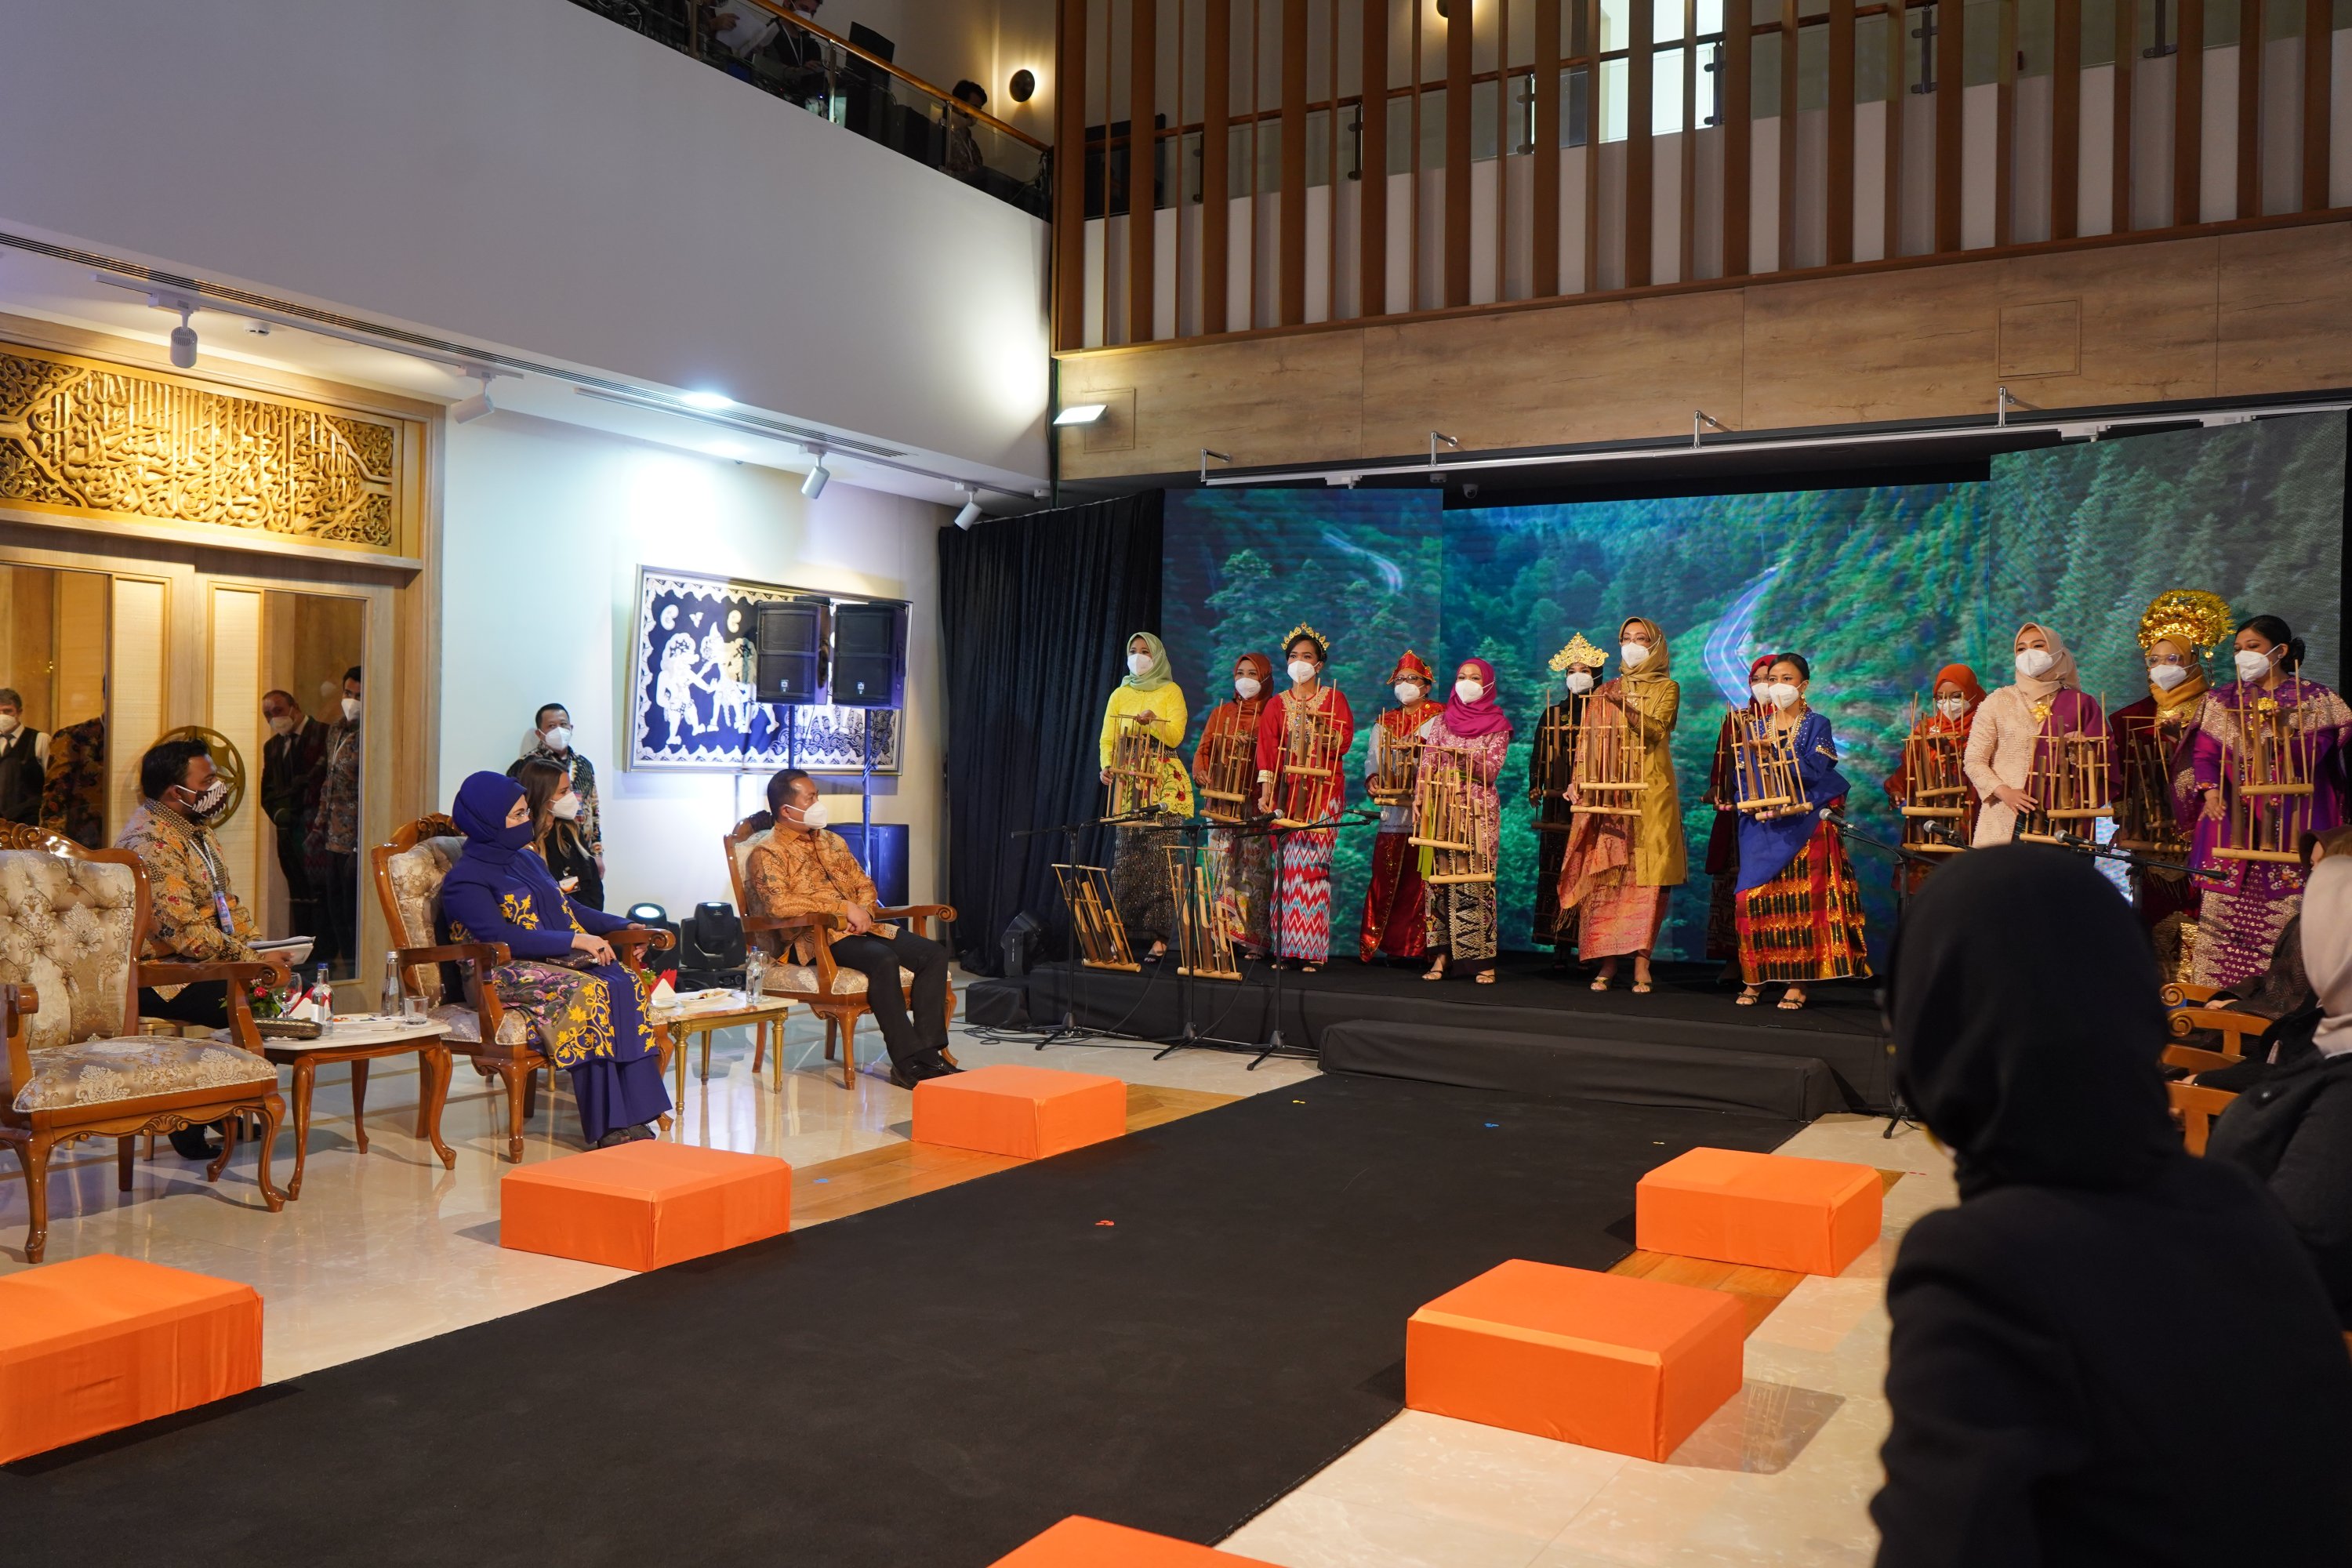 Participants, including Turkish first lady Emine Erdoğan, listen to the Angklung music show in this picture during the fashion event, Ankara, Turkey, April 7, 2021. (Courtesy of the Indonesian Embassy)